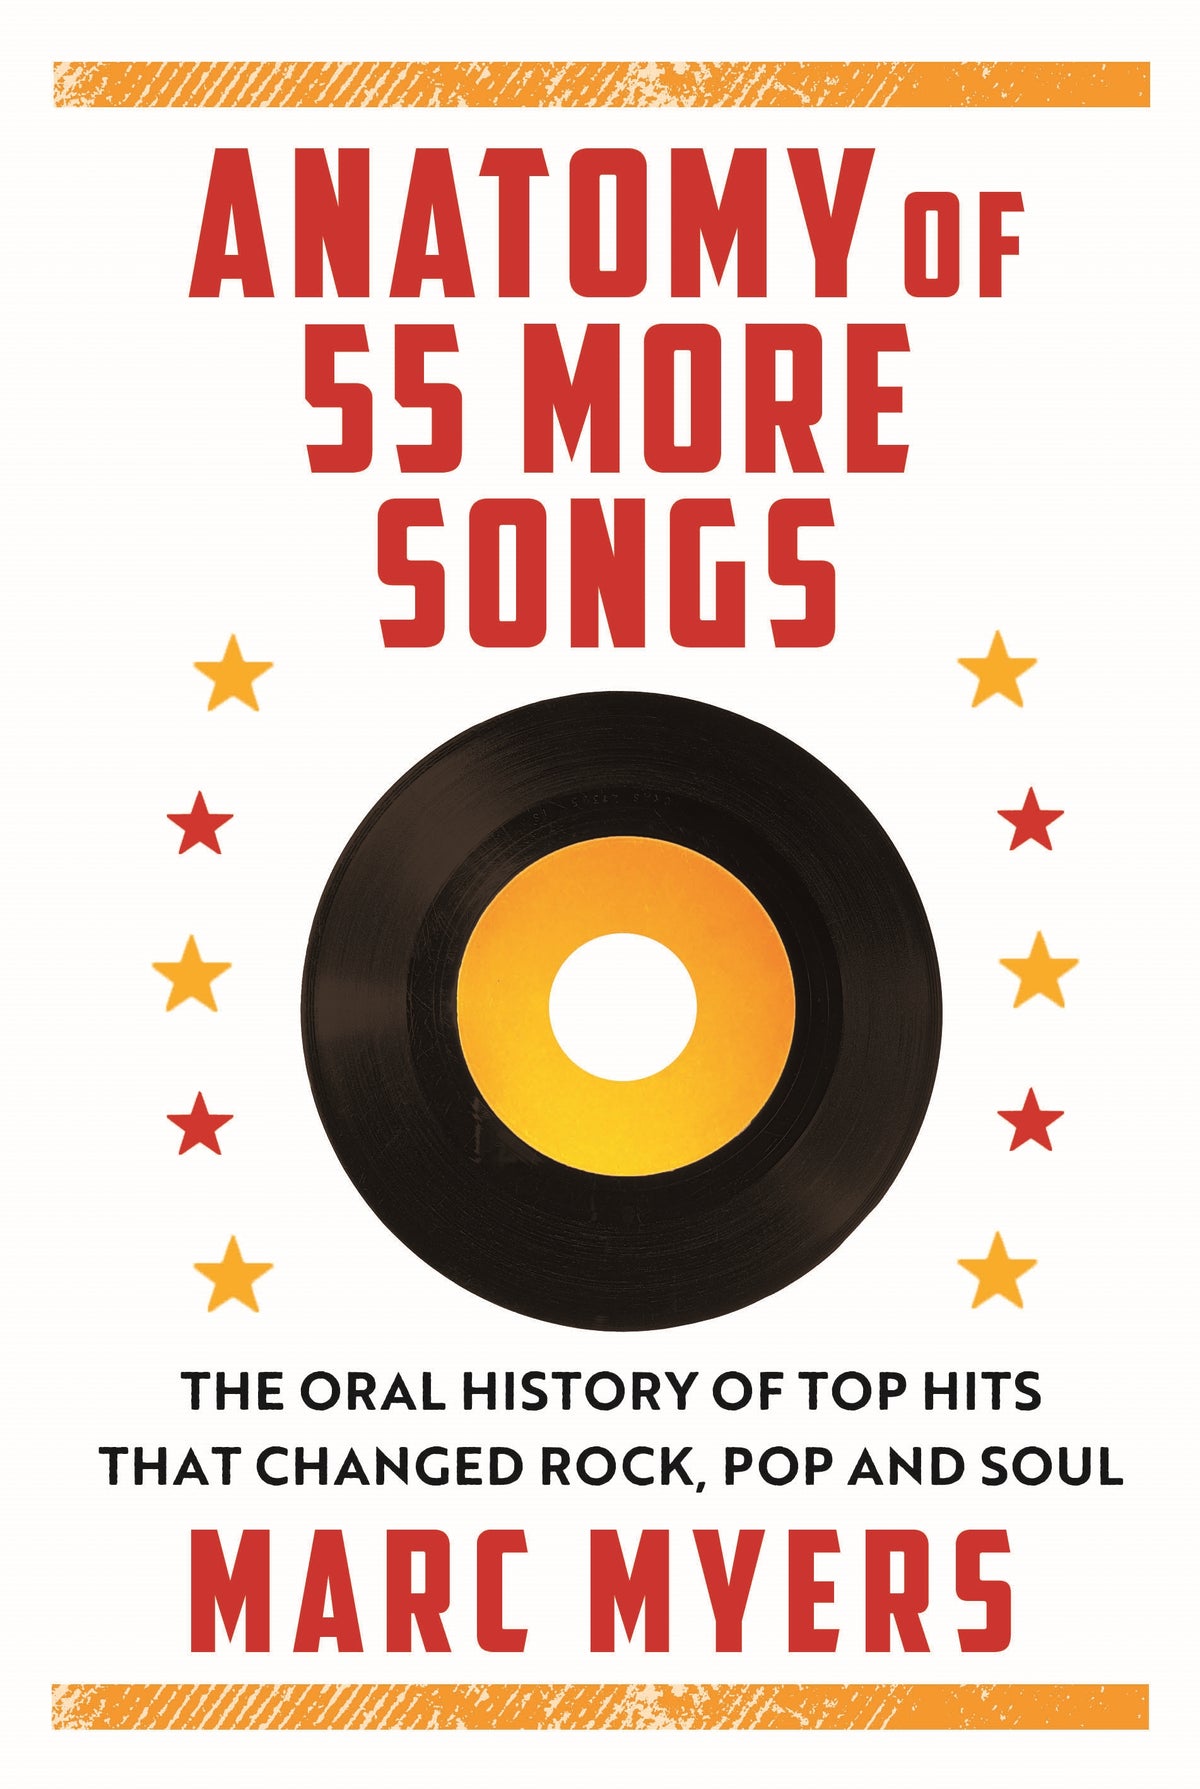 Anatomy of 55 More Songs: The Oral History of Top Hits That Changed Rock, Pop and Soul - Paperback